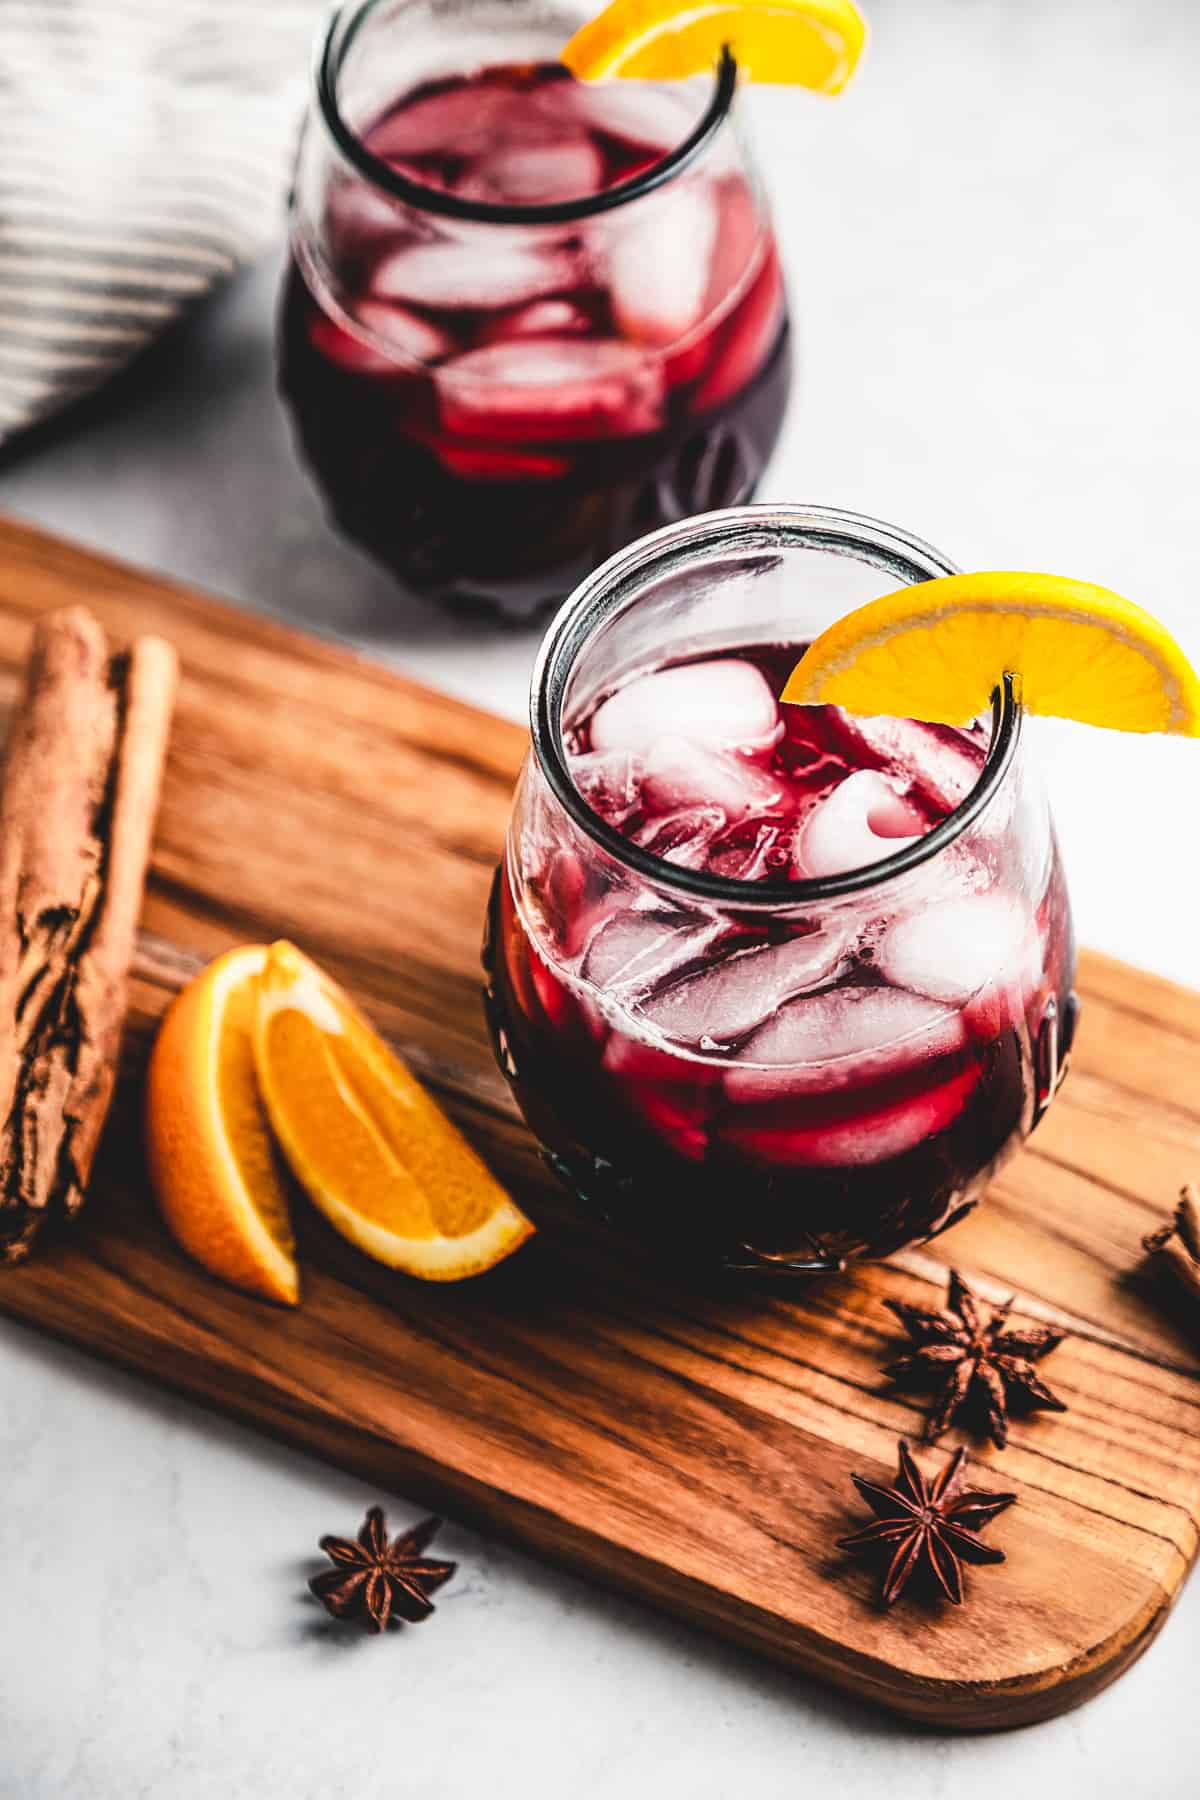 Jamaican sorrel in a glass with ice placed on a wooden board with star anise and orange slices arranged around the glass.